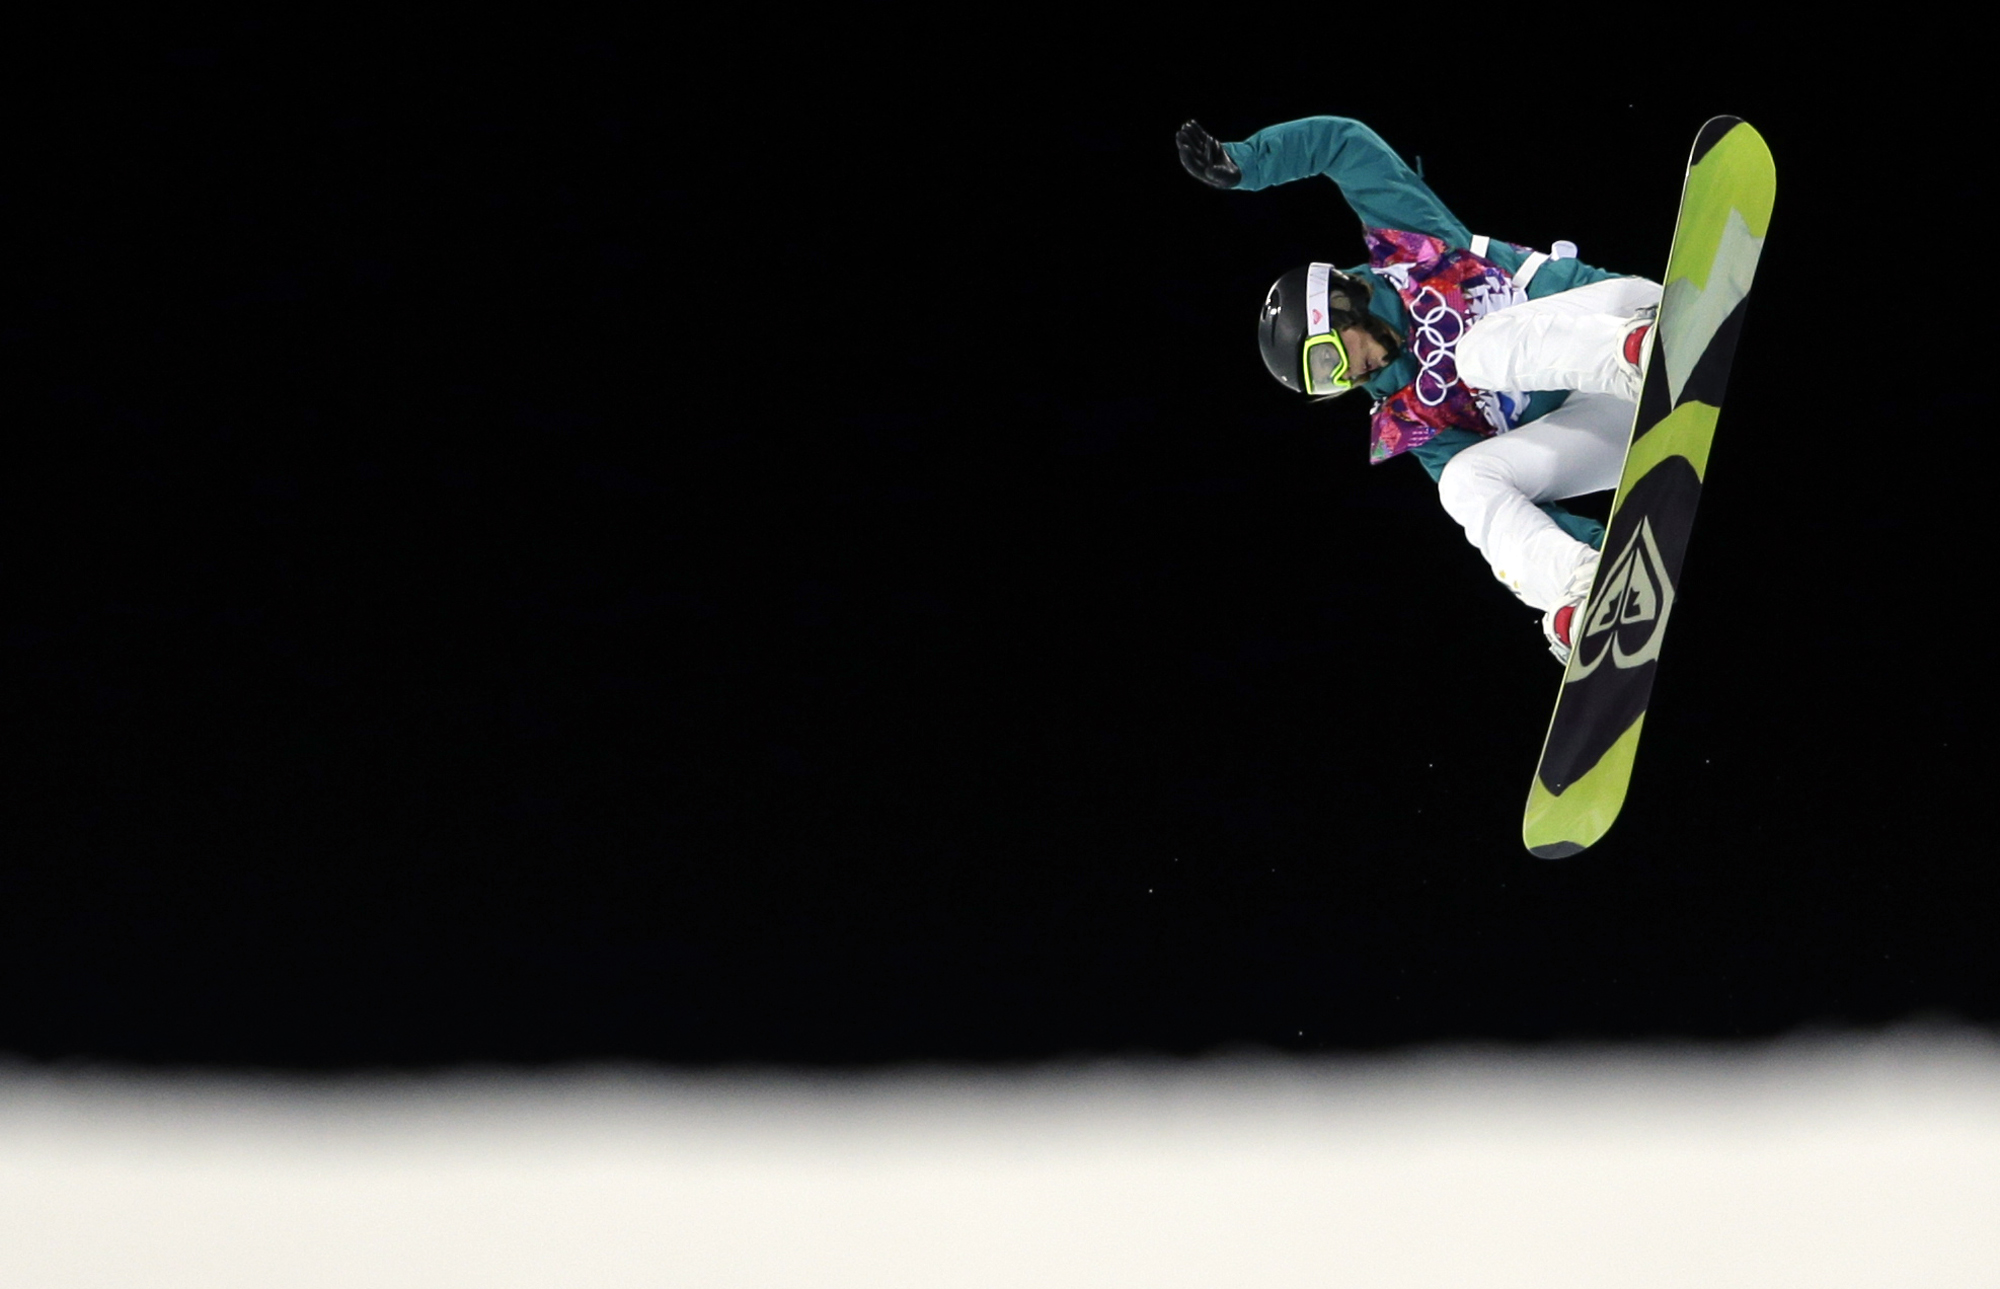 PHOTO: Australia's Torah Bright competes on her way to win the silver medal in the women's snowboard, at the Rosa Khutor Extreme Park, at the 2014 Winter Olympics, Feb. 12, 2014, in Krasnaya Polyana, Russia.